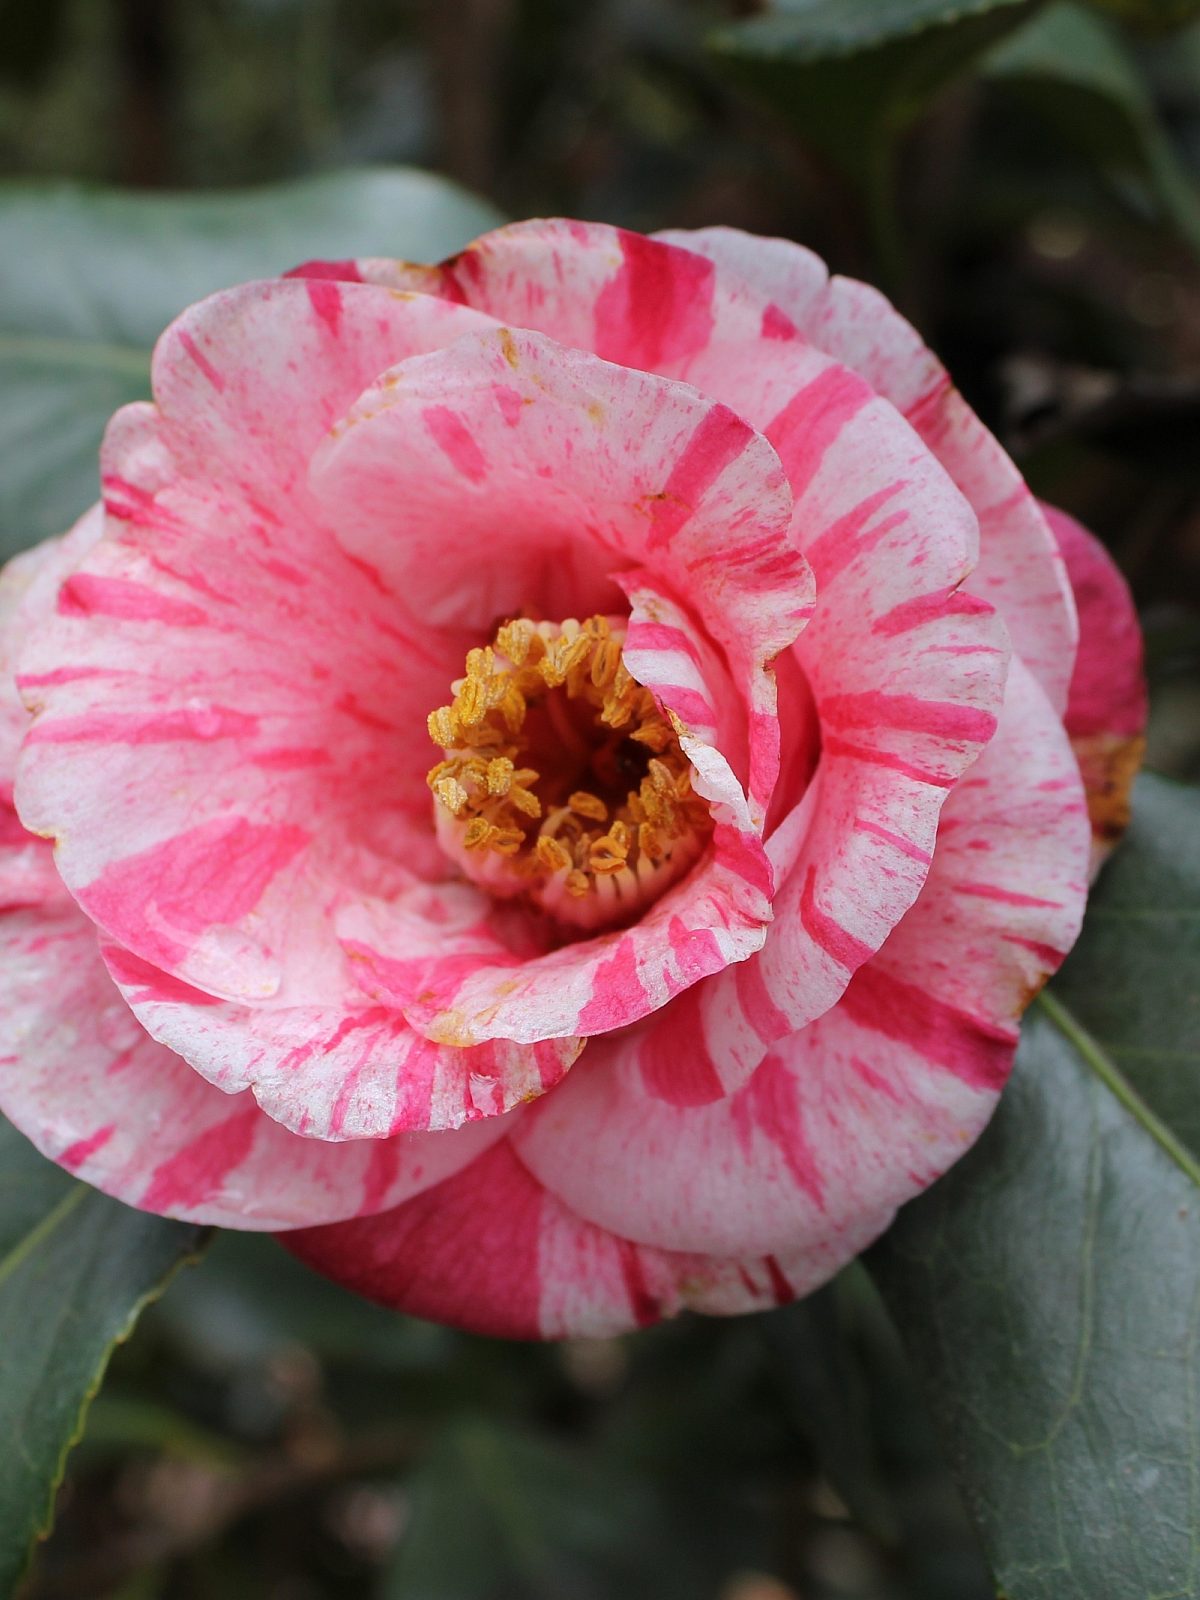 A pink and white Camellia flower